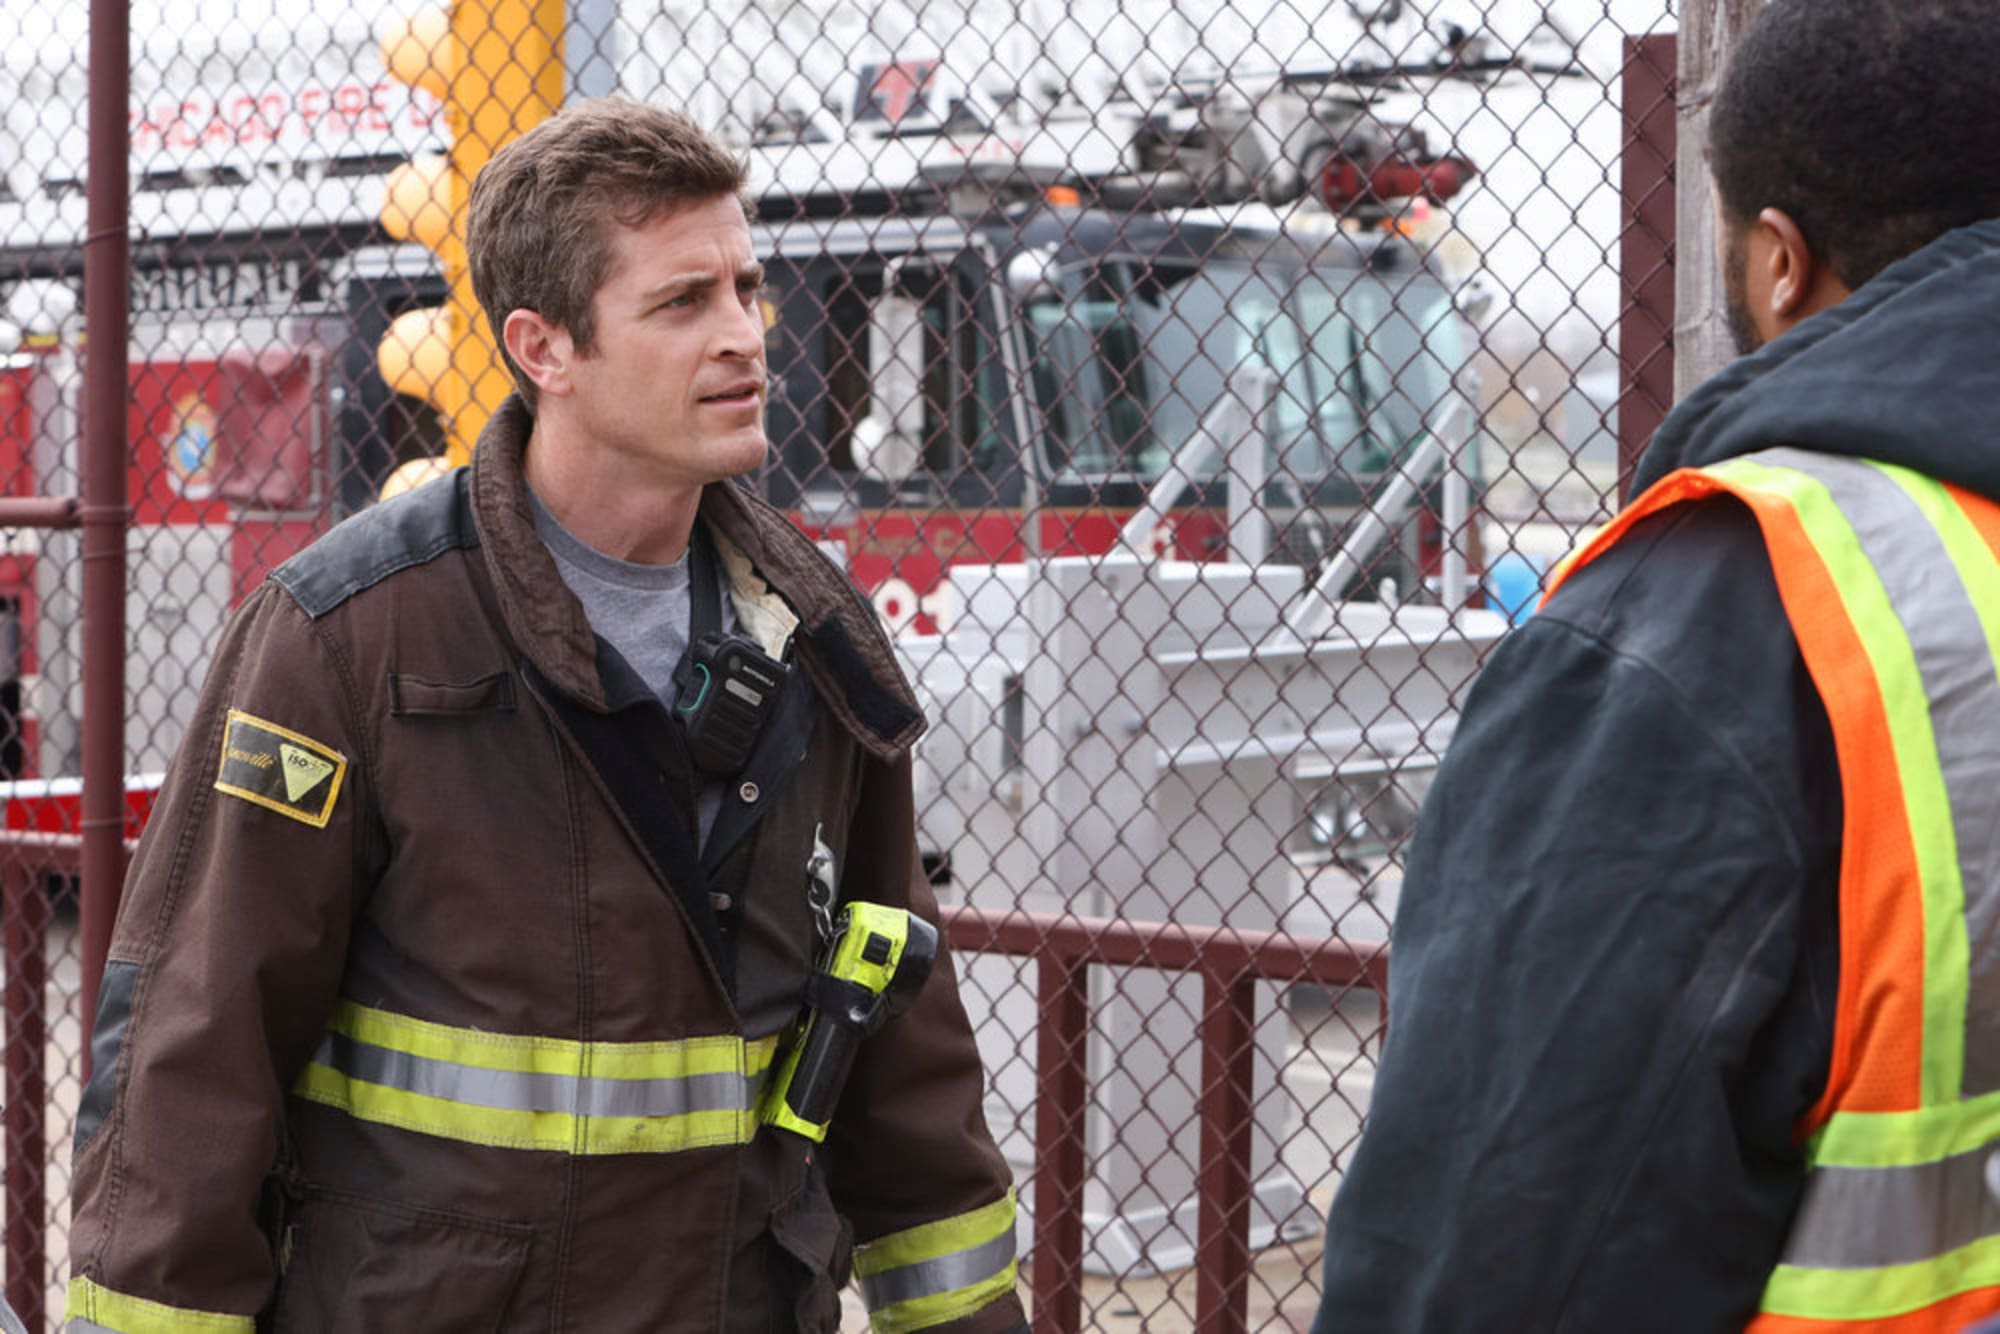 How to watch Chicago Fire season 11, episode 10 live